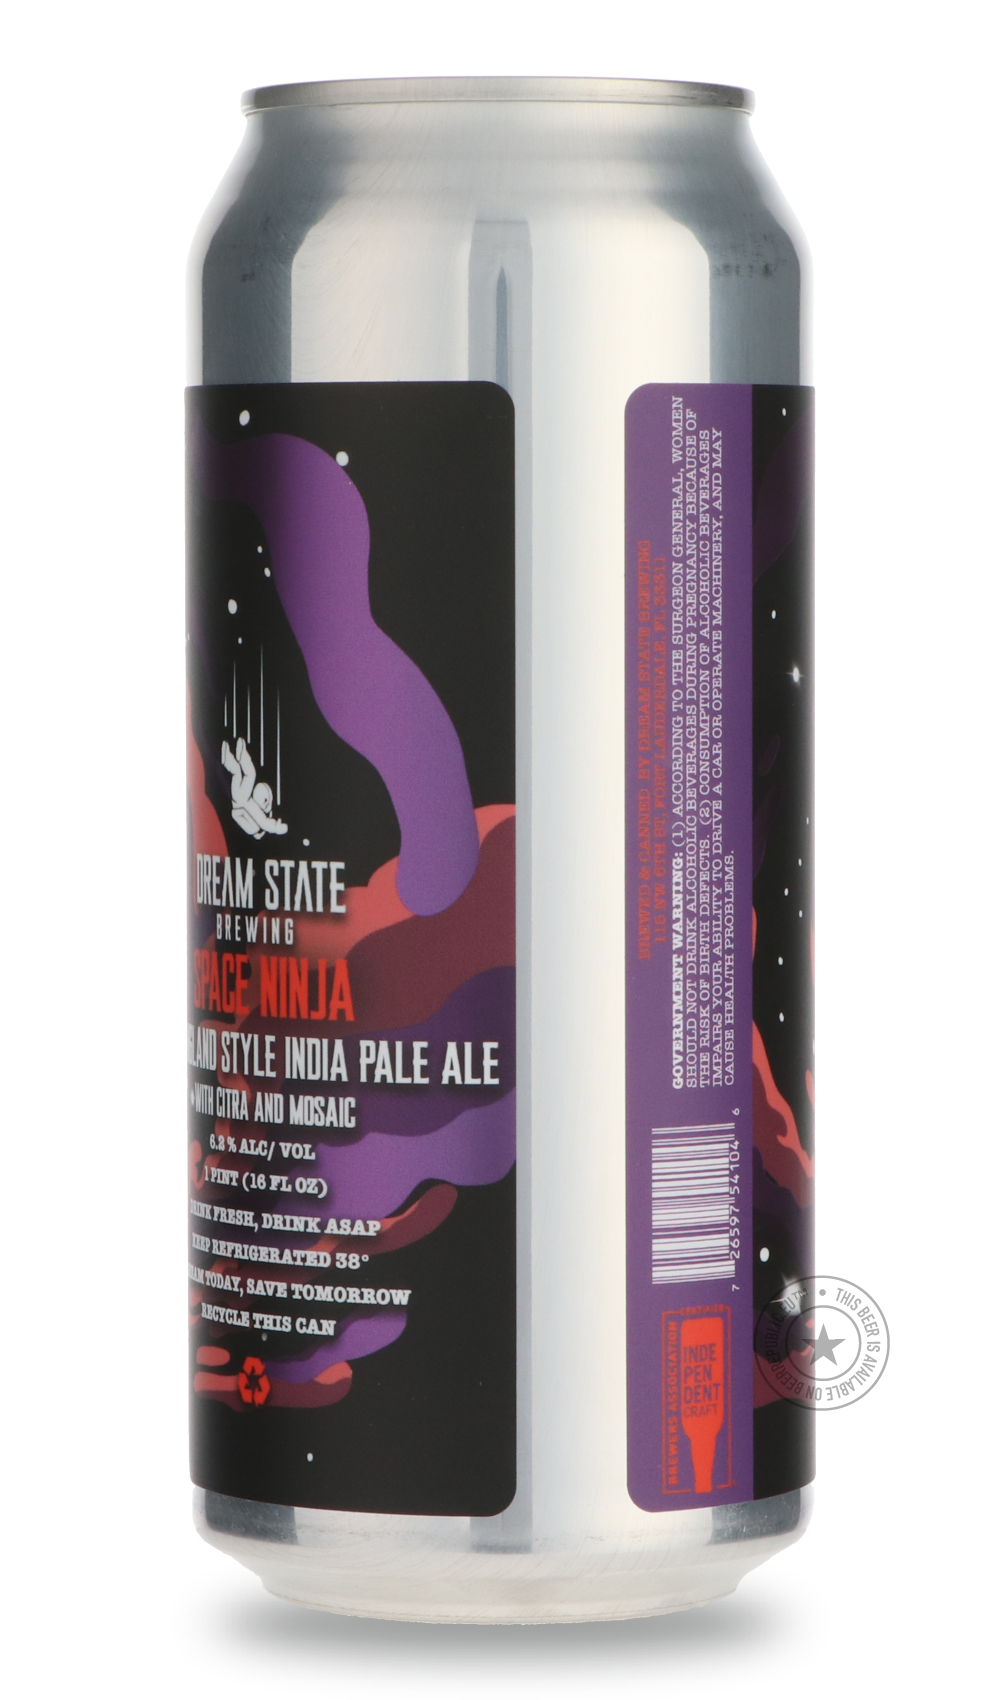 -Dream State- Space Ninja-IPA- Only @ Beer Republic - The best online beer store for American & Canadian craft beer - Buy beer online from the USA and Canada - Bier online kopen - Amerikaans bier kopen - Craft beer store - Craft beer kopen - Amerikanisch bier kaufen - Bier online kaufen - Acheter biere online - IPA - Stout - Porter - New England IPA - Hazy IPA - Imperial Stout - Barrel Aged - Barrel Aged Imperial Stout - Brown - Dark beer - Blond - Blonde - Pilsner - Lager - Wheat - Weizen - Amber - Barley 